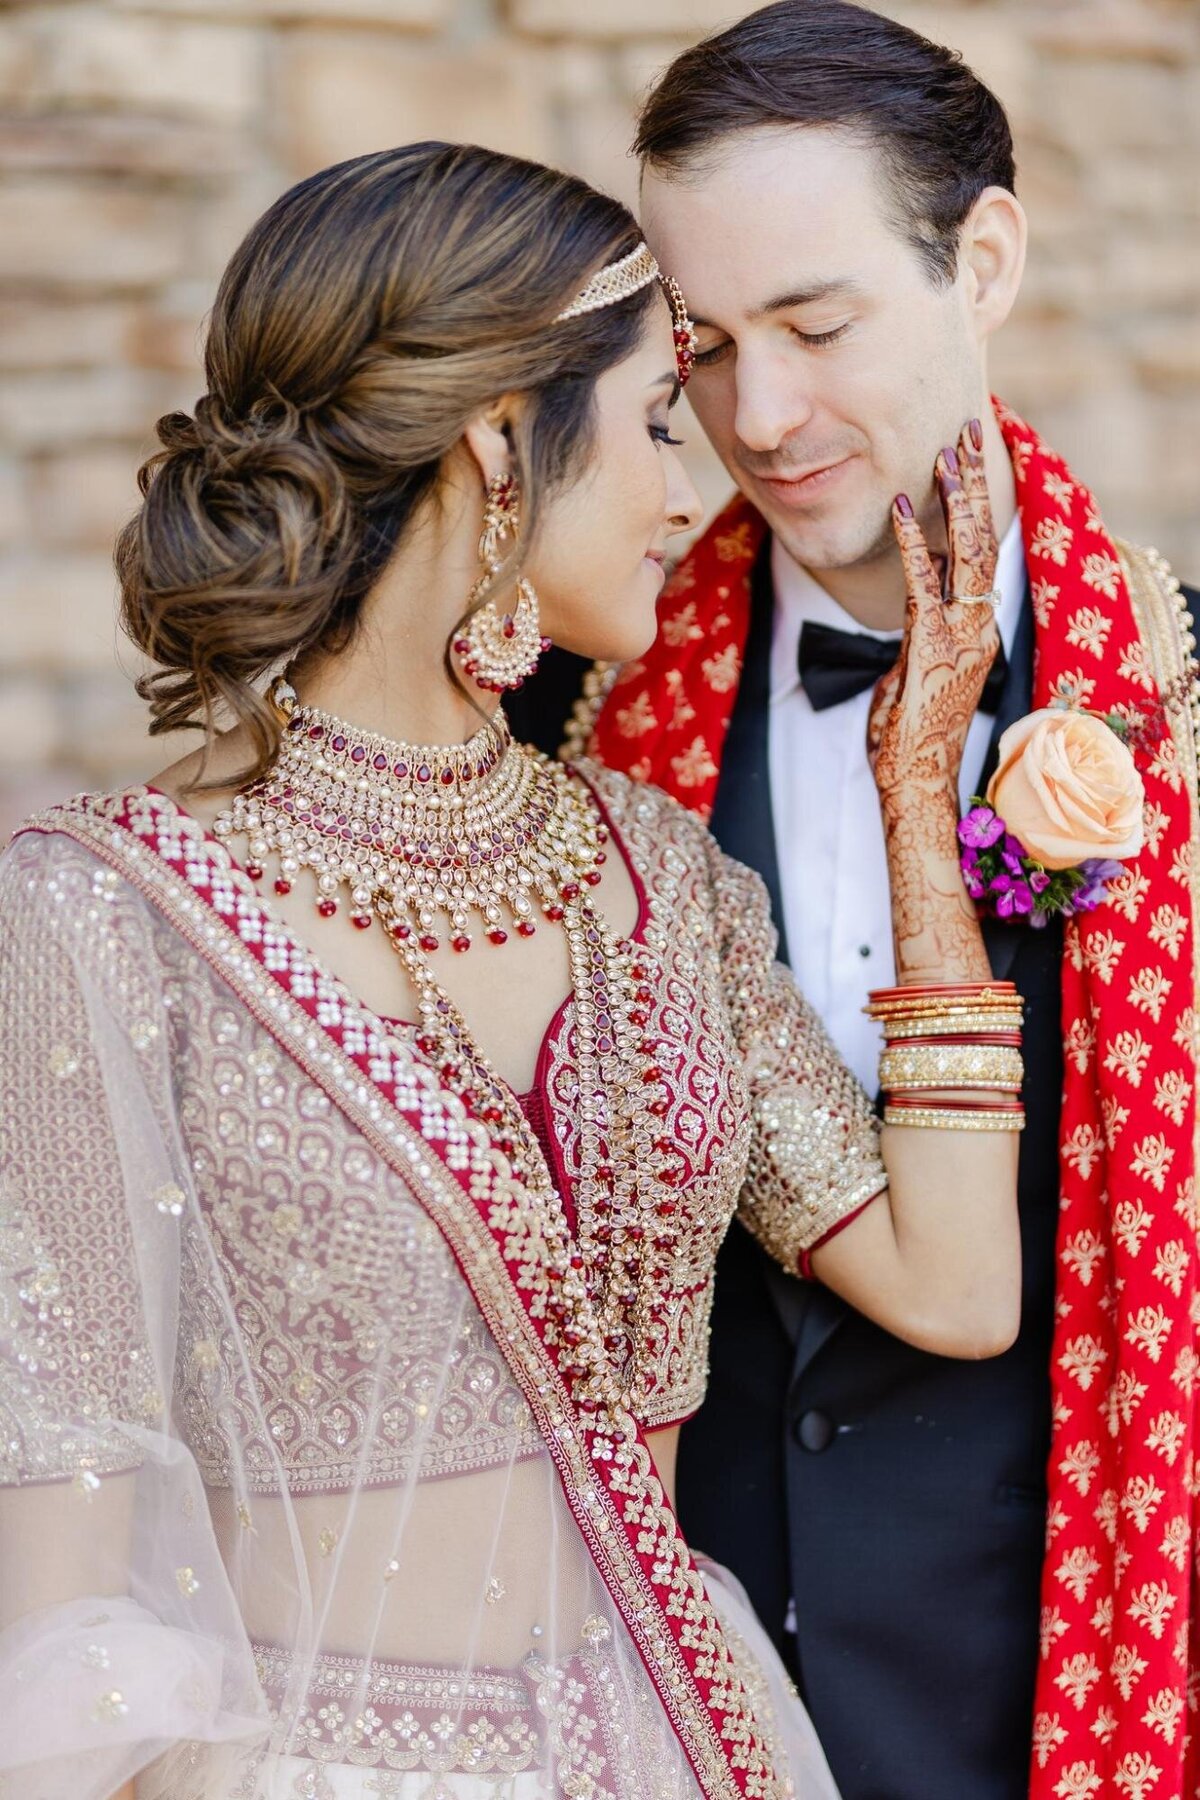 Bride in detailed traditional indian attire and groom in a black tuxedo with a red scarf, tenderly touching faces.